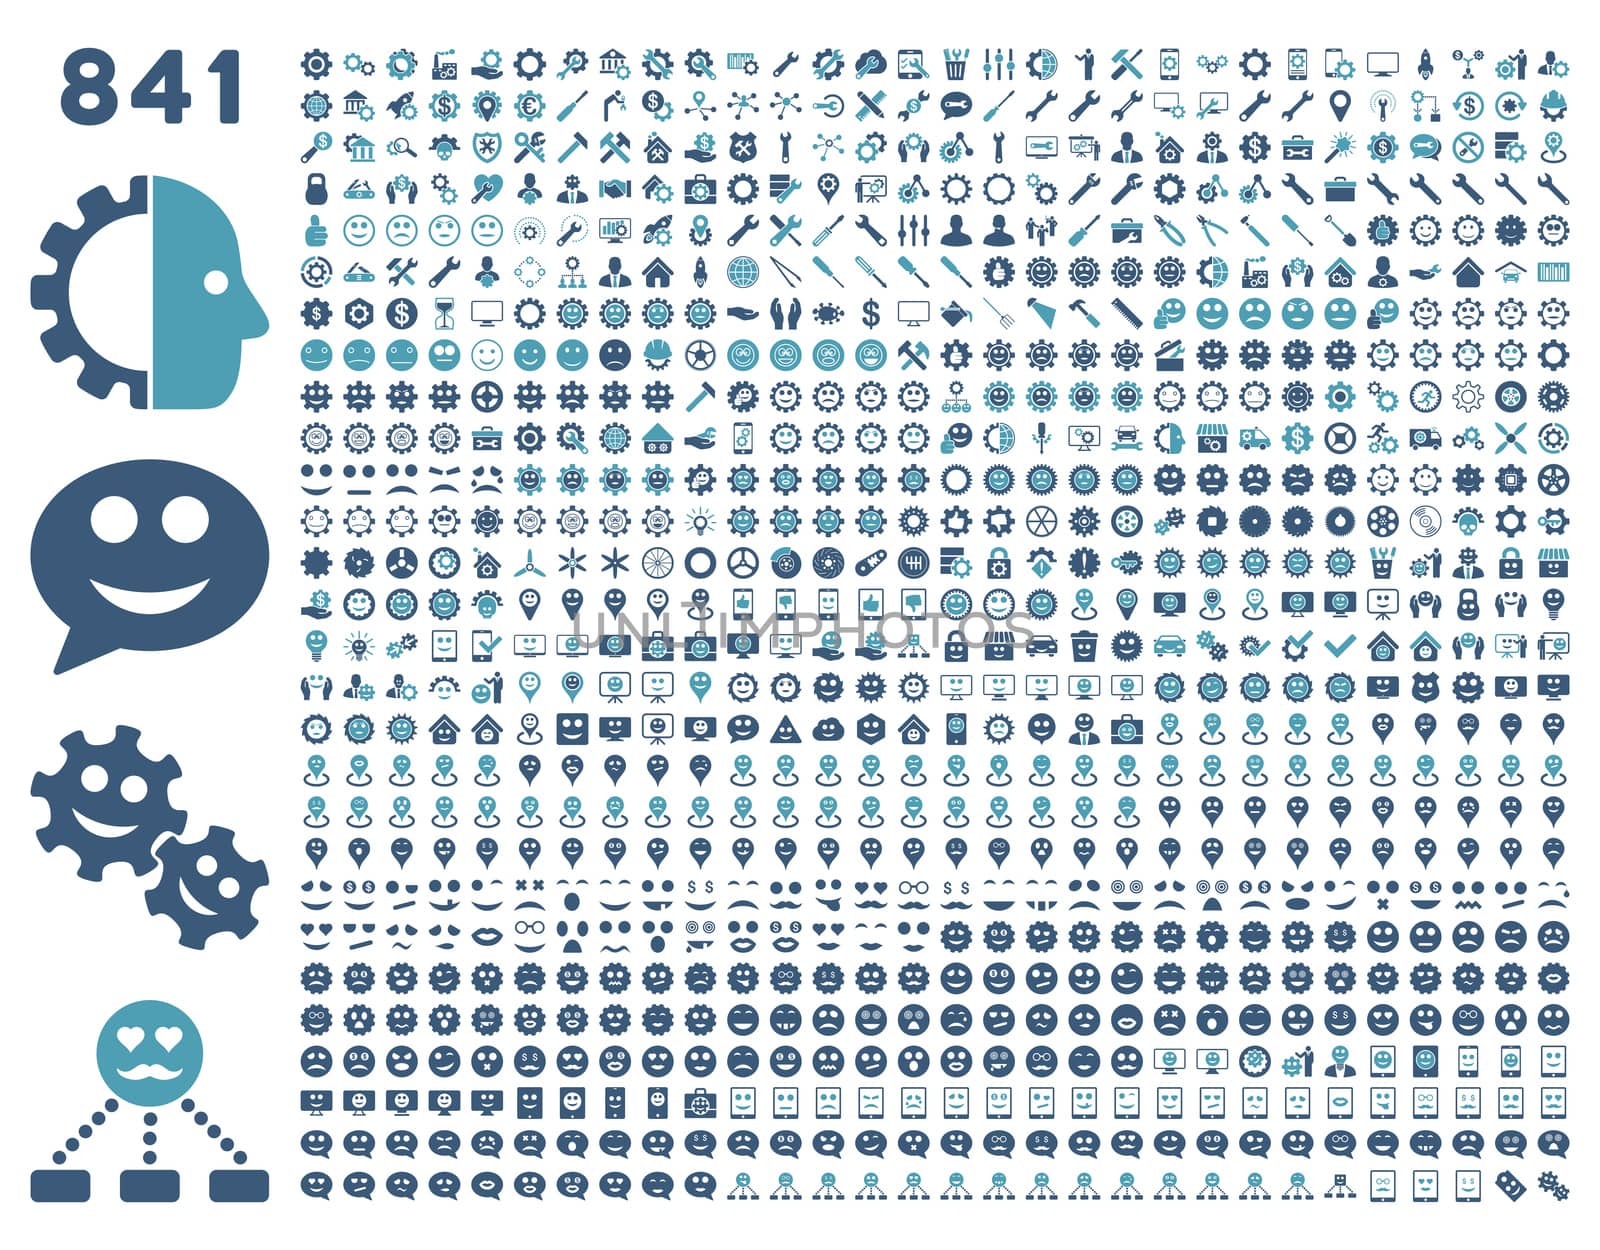 841 smile, tool, gear, map markers, mobile icons. Glyph set style: bicolor flat images, cyan and blue symbols, isolated on a white background.